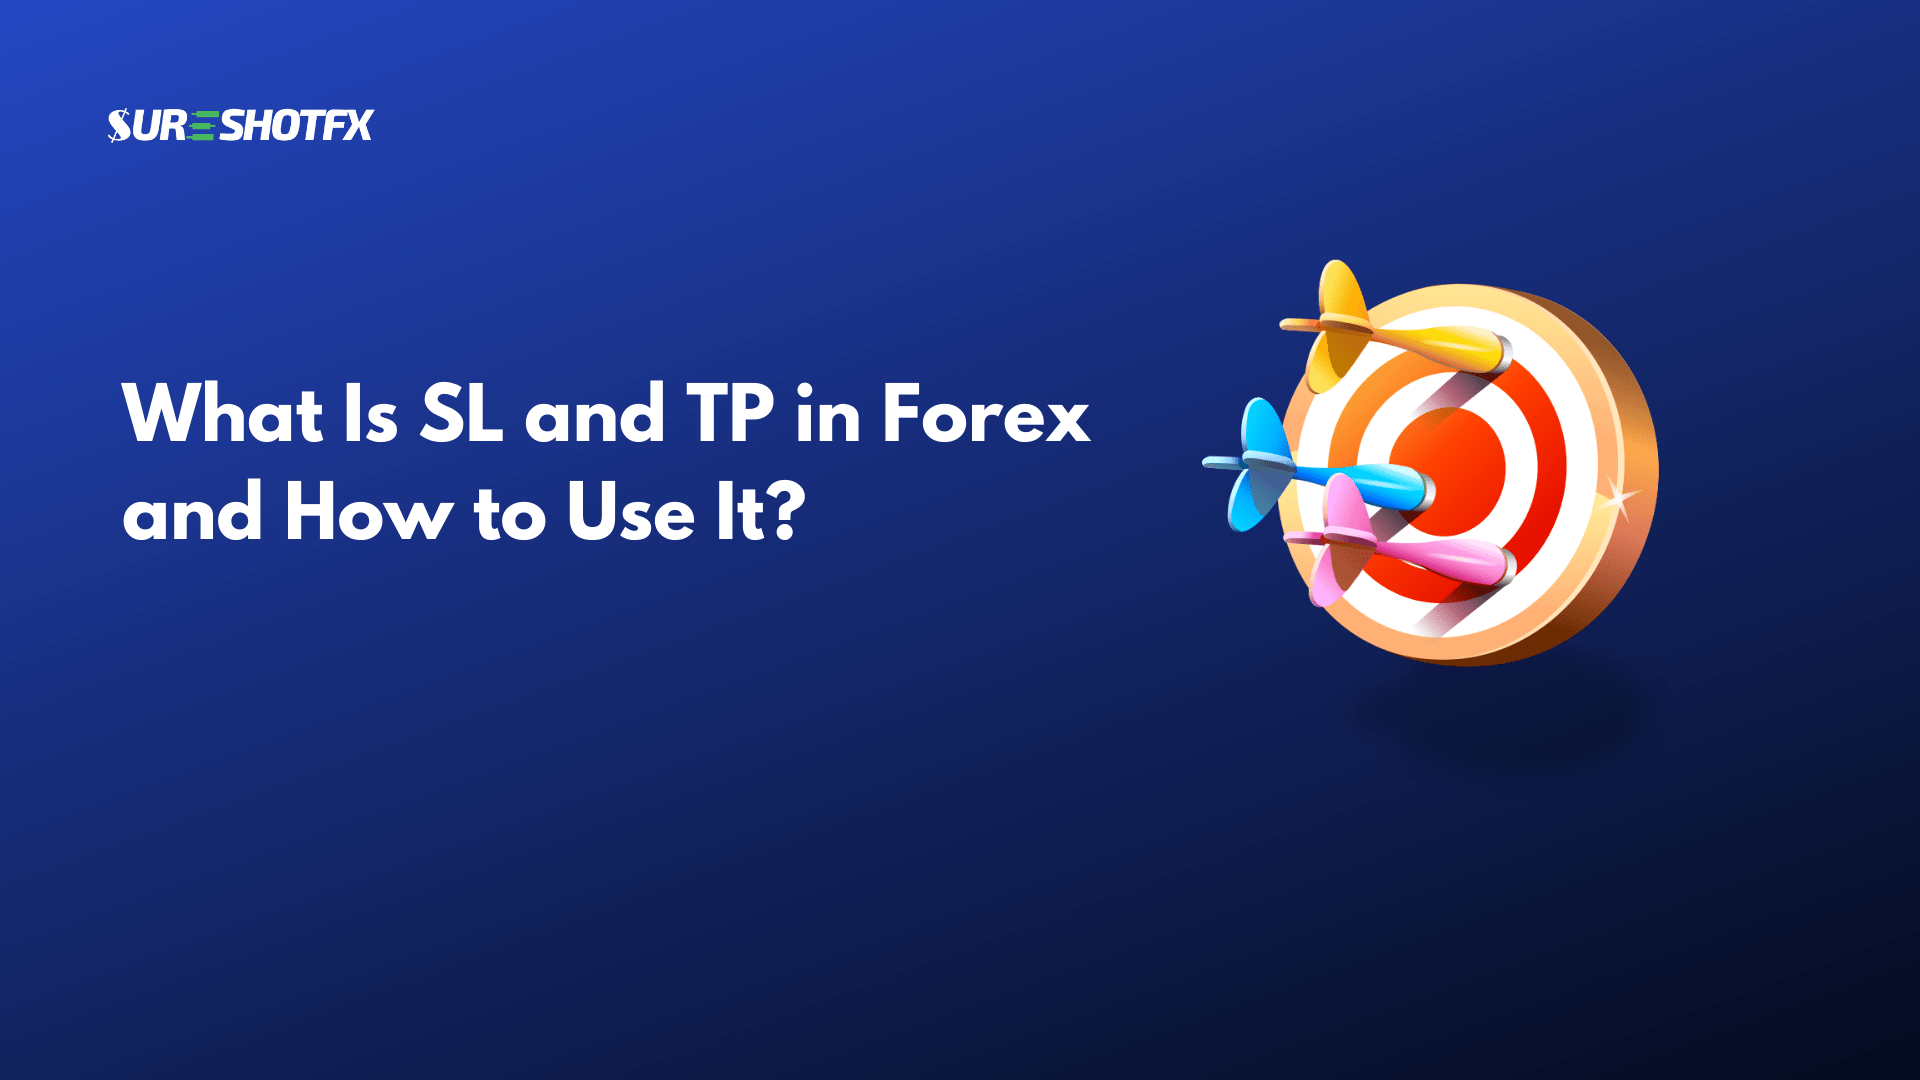 What Is SL and TP in Forex